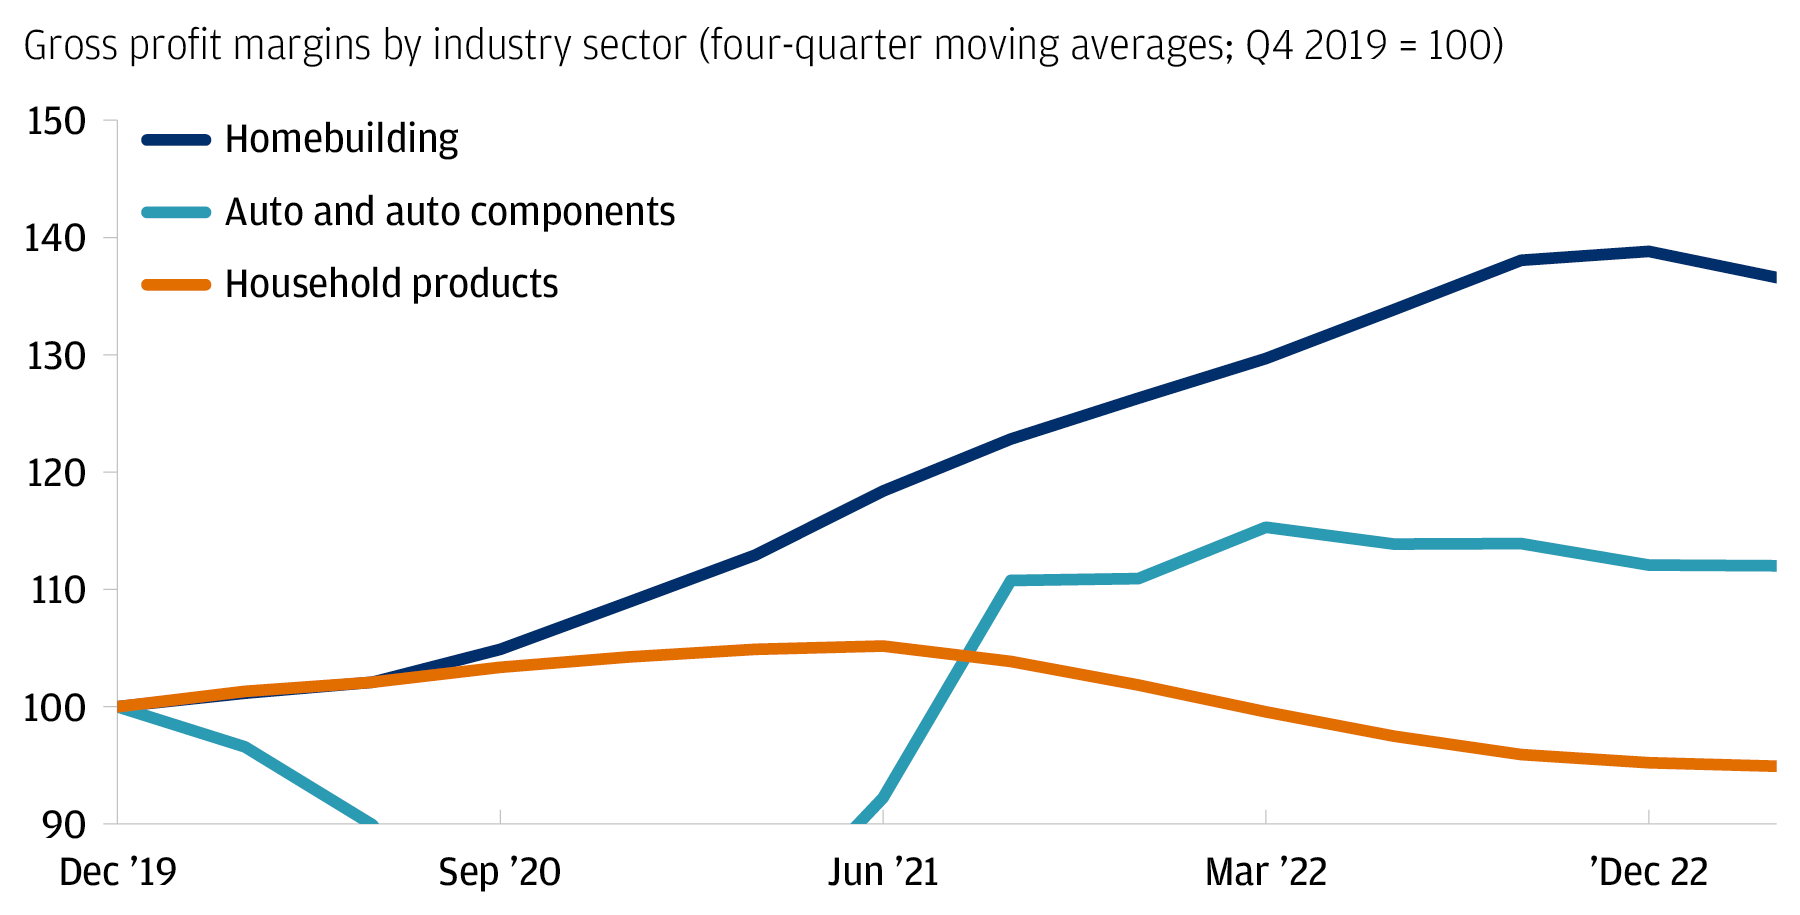 The chart describes gross margins (4 quarter-moving-average) across 3 different sectors (homebuilding, auto and auto components, and household products).